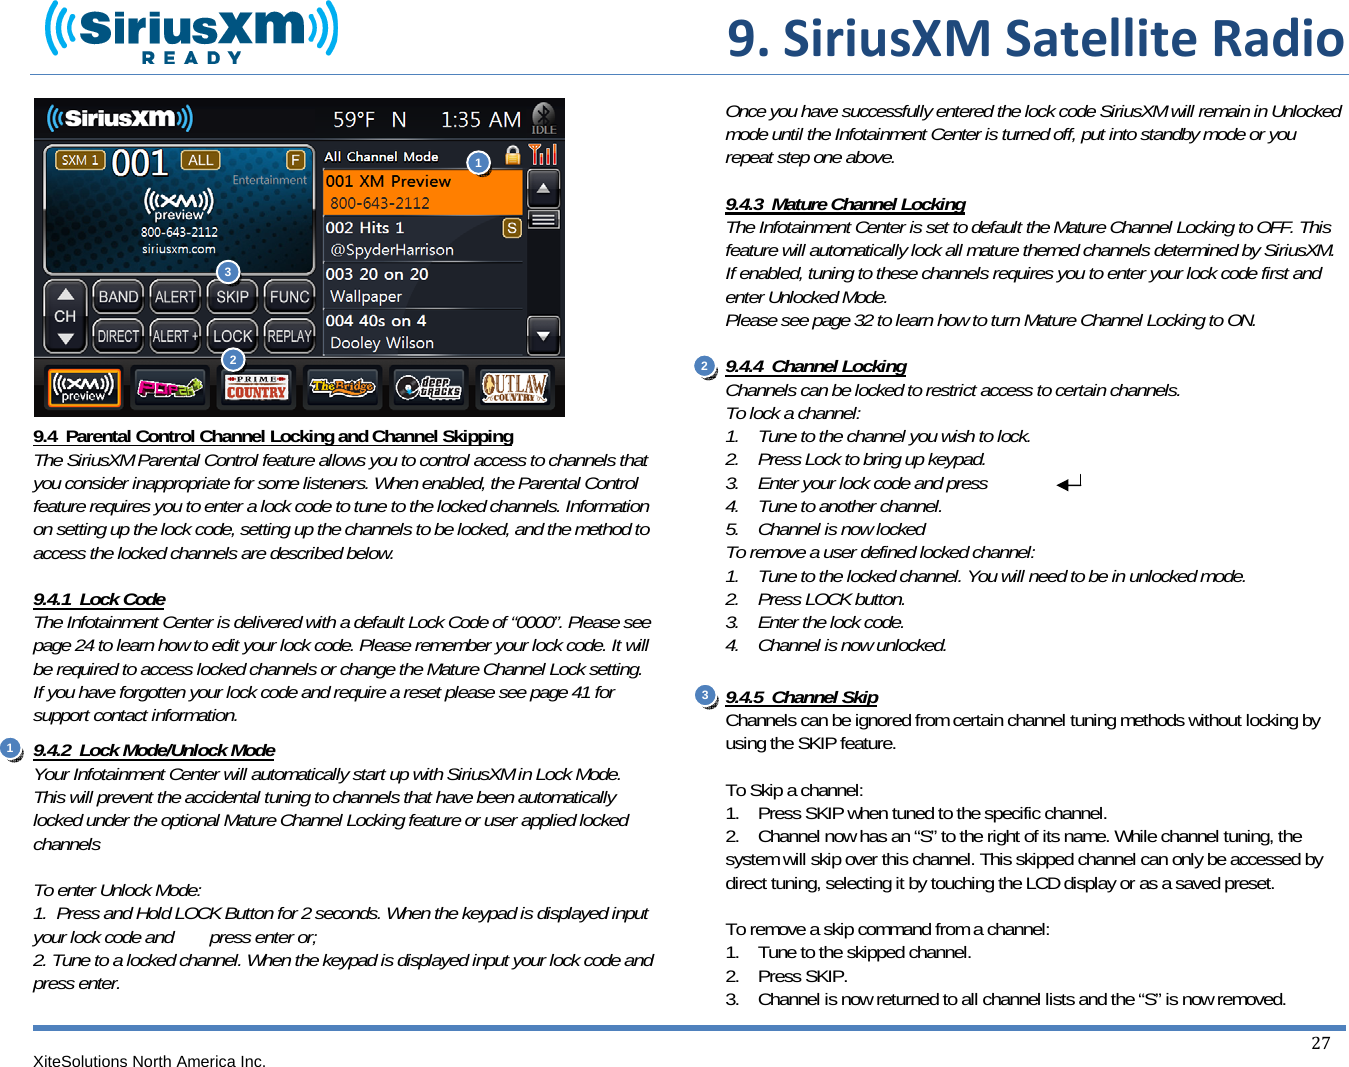  9.SiriusXMSatelliteRadioXiteSolutions North America Inc.  27               9.4  Parental Control Channel Locking and Channel Skipping The SiriusXM Parental Control feature allows you to control access to channels that you consider inappropriate for some listeners. When enabled, the Parental Control feature requires you to enter a lock code to tune to the locked channels. Information on setting up the lock code, setting up the channels to be locked, and the method to access the locked channels are described below.  9.4.1  Lock Code The Infotainment Center is delivered with a default Lock Code of “0000”. Please see page 24 to learn how to edit your lock code. Please remember your lock code. It will be required to access locked channels or change the Mature Channel Lock setting. If you have forgotten your lock code and require a reset please see page 41 for support contact information. 9.4.2  Lock Mode/Unlock Mode Your Infotainment Center will automatically start up with SiriusXM in Lock Mode. This will prevent the accidental tuning to channels that have been automatically locked under the optional Mature Channel Locking feature or user applied locked channels  To enter Unlock Mode: 1.  Press and Hold LOCK Button for 2 seconds. When the keypad is displayed input your lock code and        press enter or; 2. Tune to a locked channel. When the keypad is displayed input your lock code and press enter.  Once you have successfully entered the lock code SiriusXM will remain in Unlocked mode until the Infotainment Center is turned off, put into standby mode or you repeat step one above.  9.4.3  Mature Channel Locking The Infotainment Center is set to default the Mature Channel Locking to OFF. This feature will automatically lock all mature themed channels determined by SiriusXM. If enabled, tuning to these channels requires you to enter your lock code first and enter Unlocked Mode. Please see page 32 to learn how to turn Mature Channel Locking to ON.   9.4.4  Channel Locking Channels can be locked to restrict access to certain channels. To lock a channel: 1.    Tune to the channel you wish to lock. 2.    Press Lock to bring up keypad. 3.    Enter your lock code and press 4.    Tune to another channel. 5.    Channel is now locked To remove a user defined locked channel: 1.    Tune to the locked channel. You will need to be in unlocked mode.  2.    Press LOCK button. 3.    Enter the lock code. 4.    Channel is now unlocked.   9.4.5  Channel Skip Channels can be ignored from certain channel tuning methods without locking by using the SKIP feature.  To Skip a channel: 1.    Press SKIP when tuned to the specific channel. 2.    Channel now has an “S” to the right of its name. While channel tuning, the system will skip over this channel. This skipped channel can only be accessed by direct tuning, selecting it by touching the LCD display or as a saved preset.  To remove a skip command from a channel: 1.    Tune to the skipped channel. 2.    Press SKIP. 3.    Channel is now returned to all channel lists and the “S” is now removed. 11 2  23 3